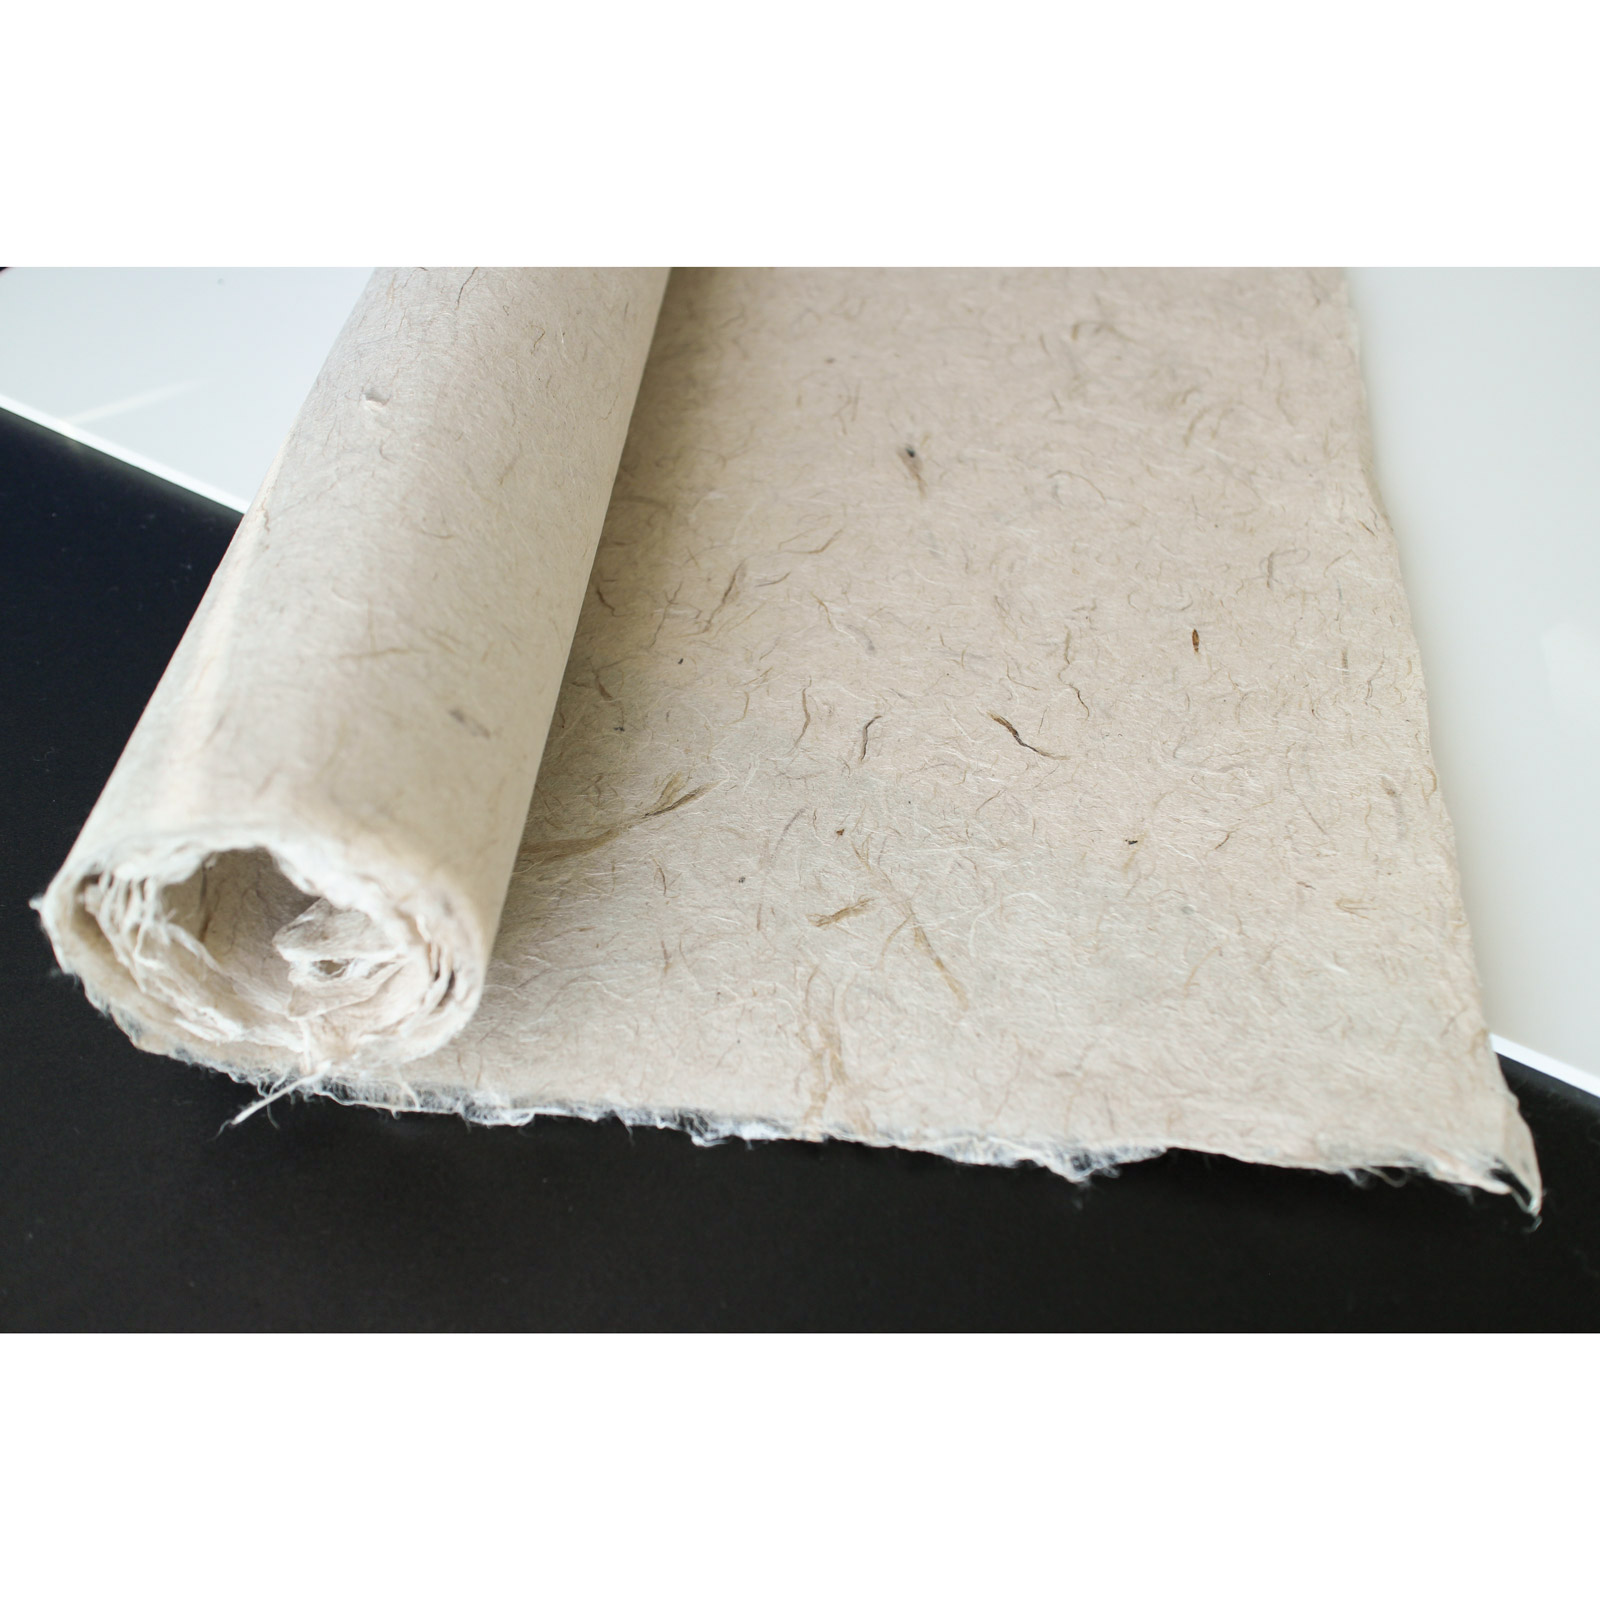 Korean Paper Colored Hanji Ancient Korean Letter Document Printed Natural  Fiber Texture Gift Wrapping Packaging Decorative Paper 10 Sheets 